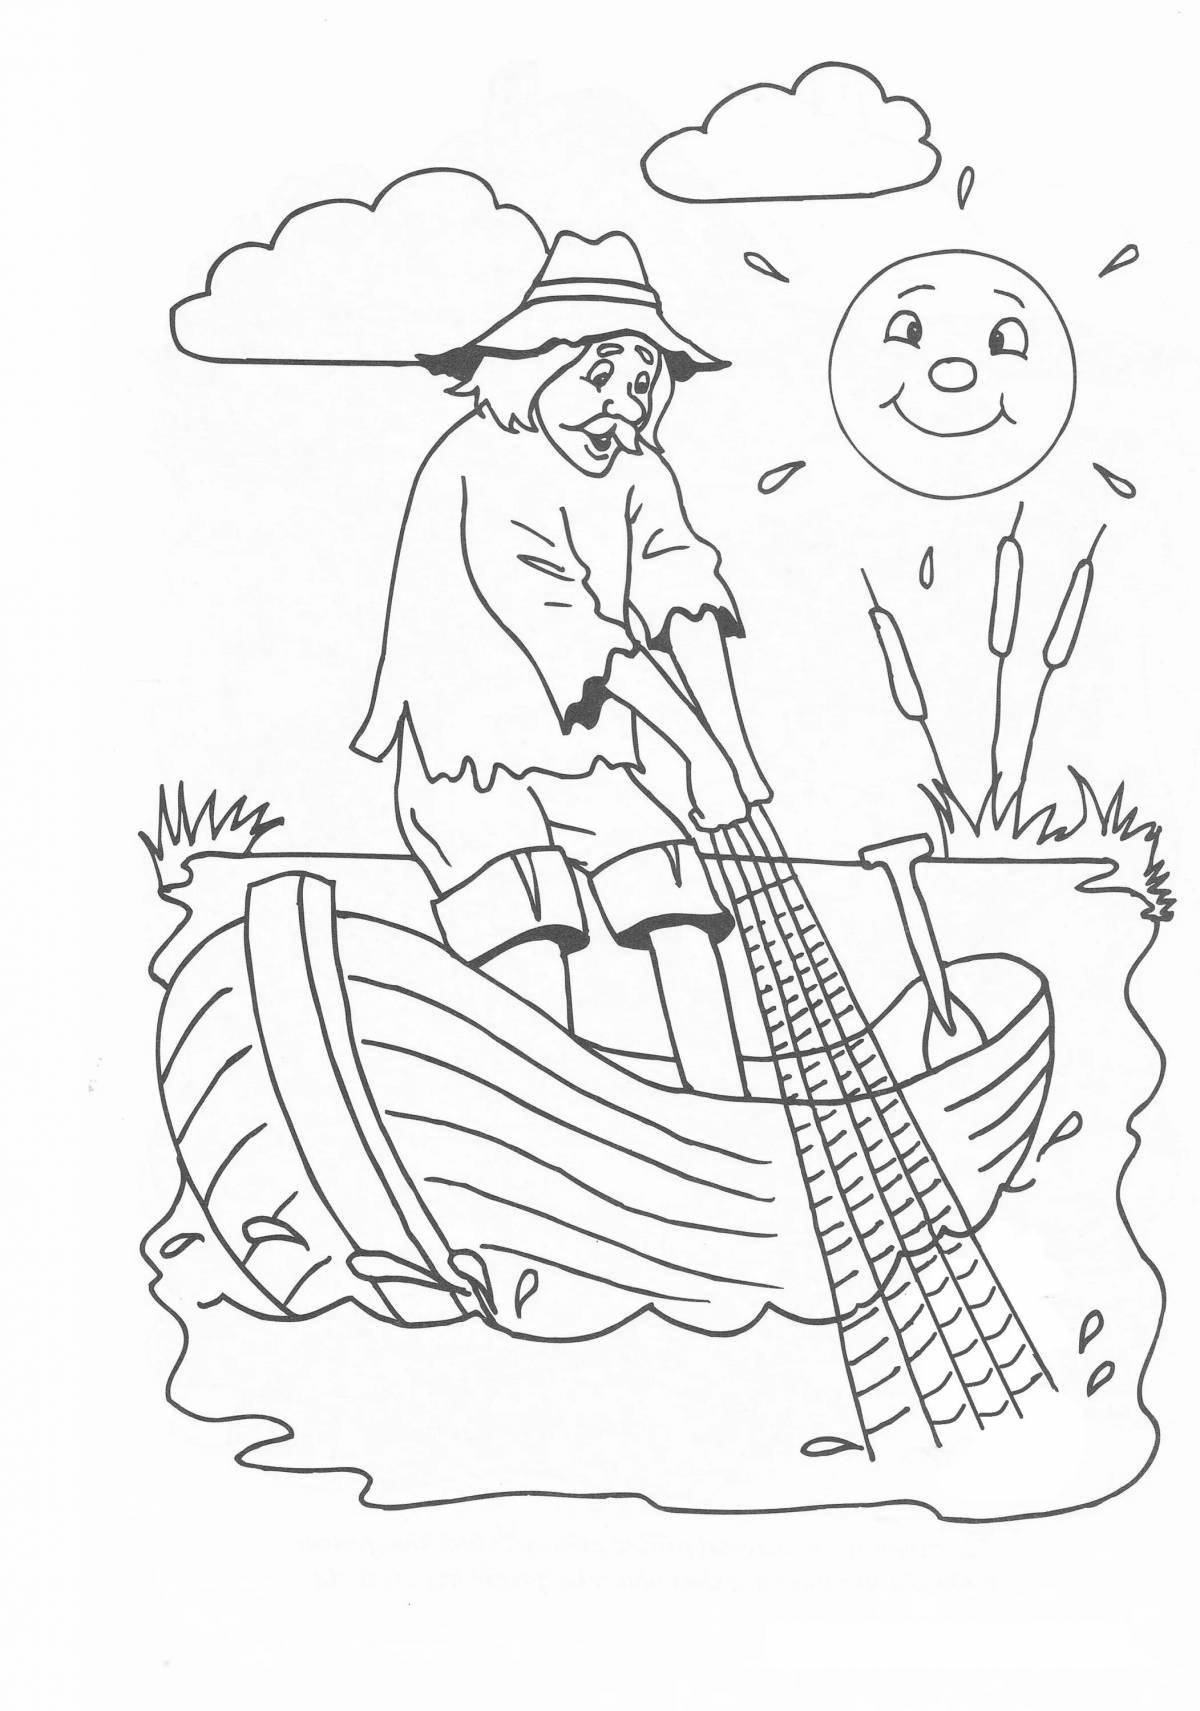 Adorable old man coloring page with goldfish